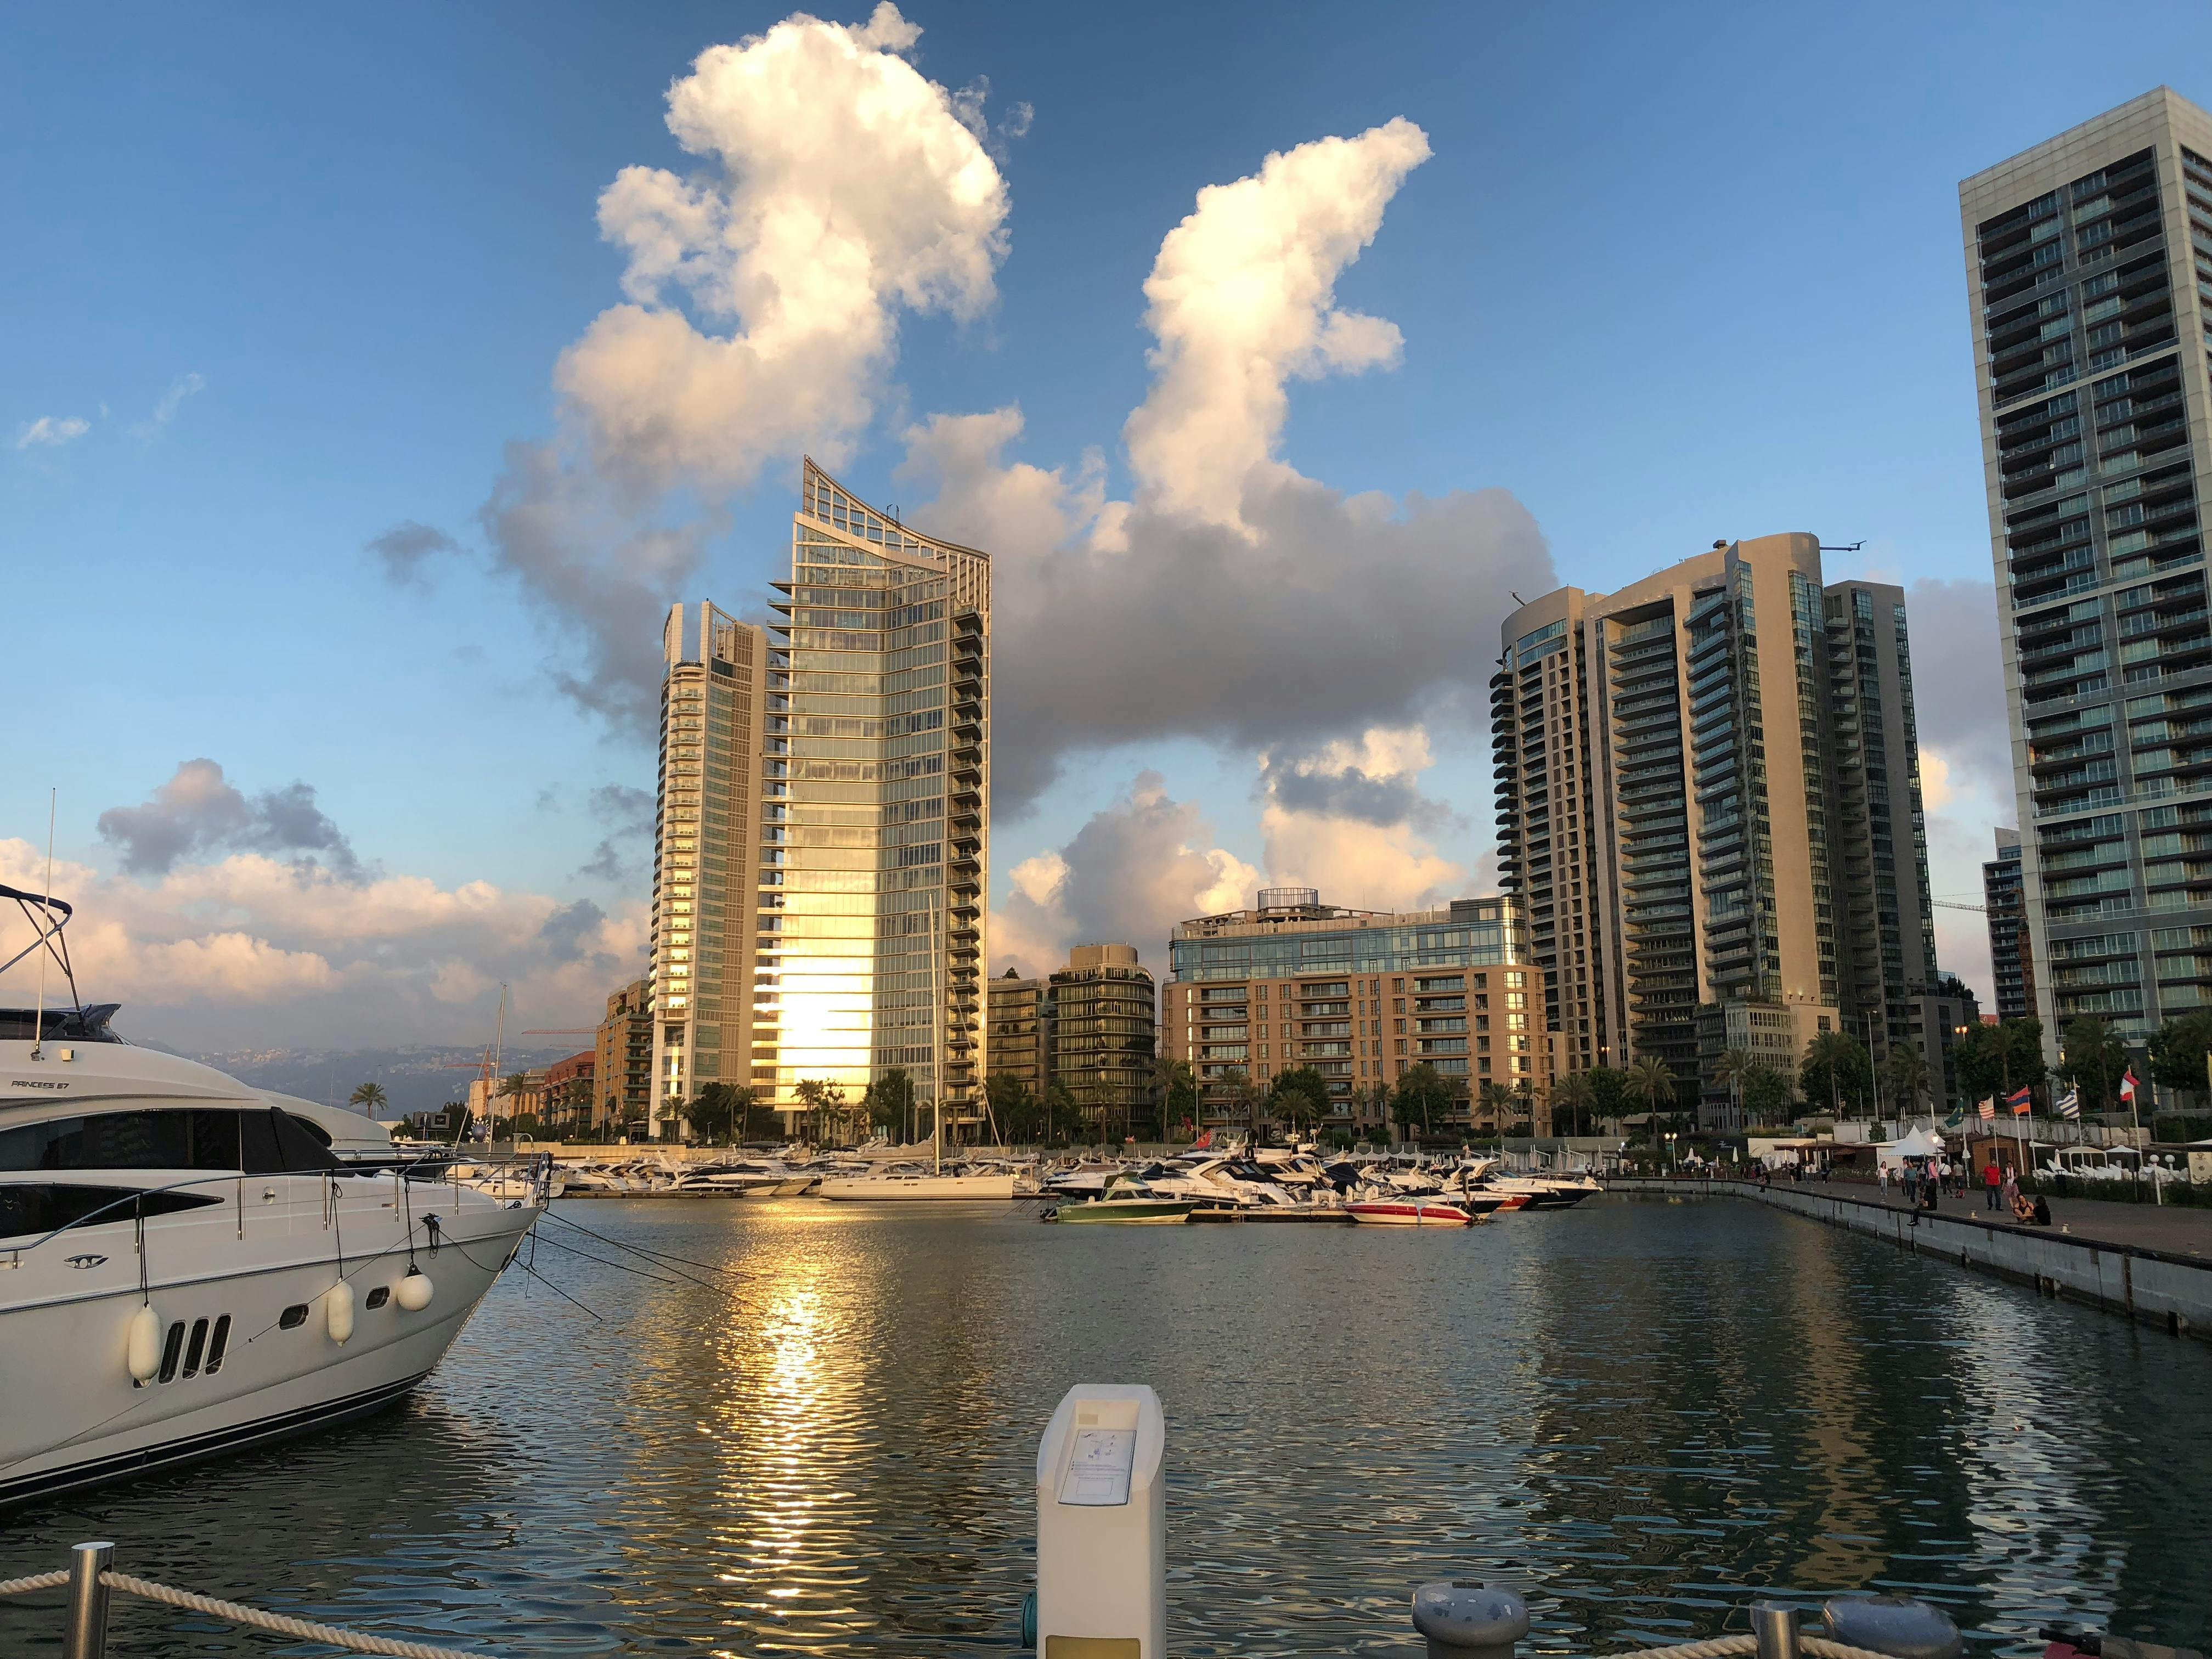 Free stock photo of buildings, clouds form, yachts